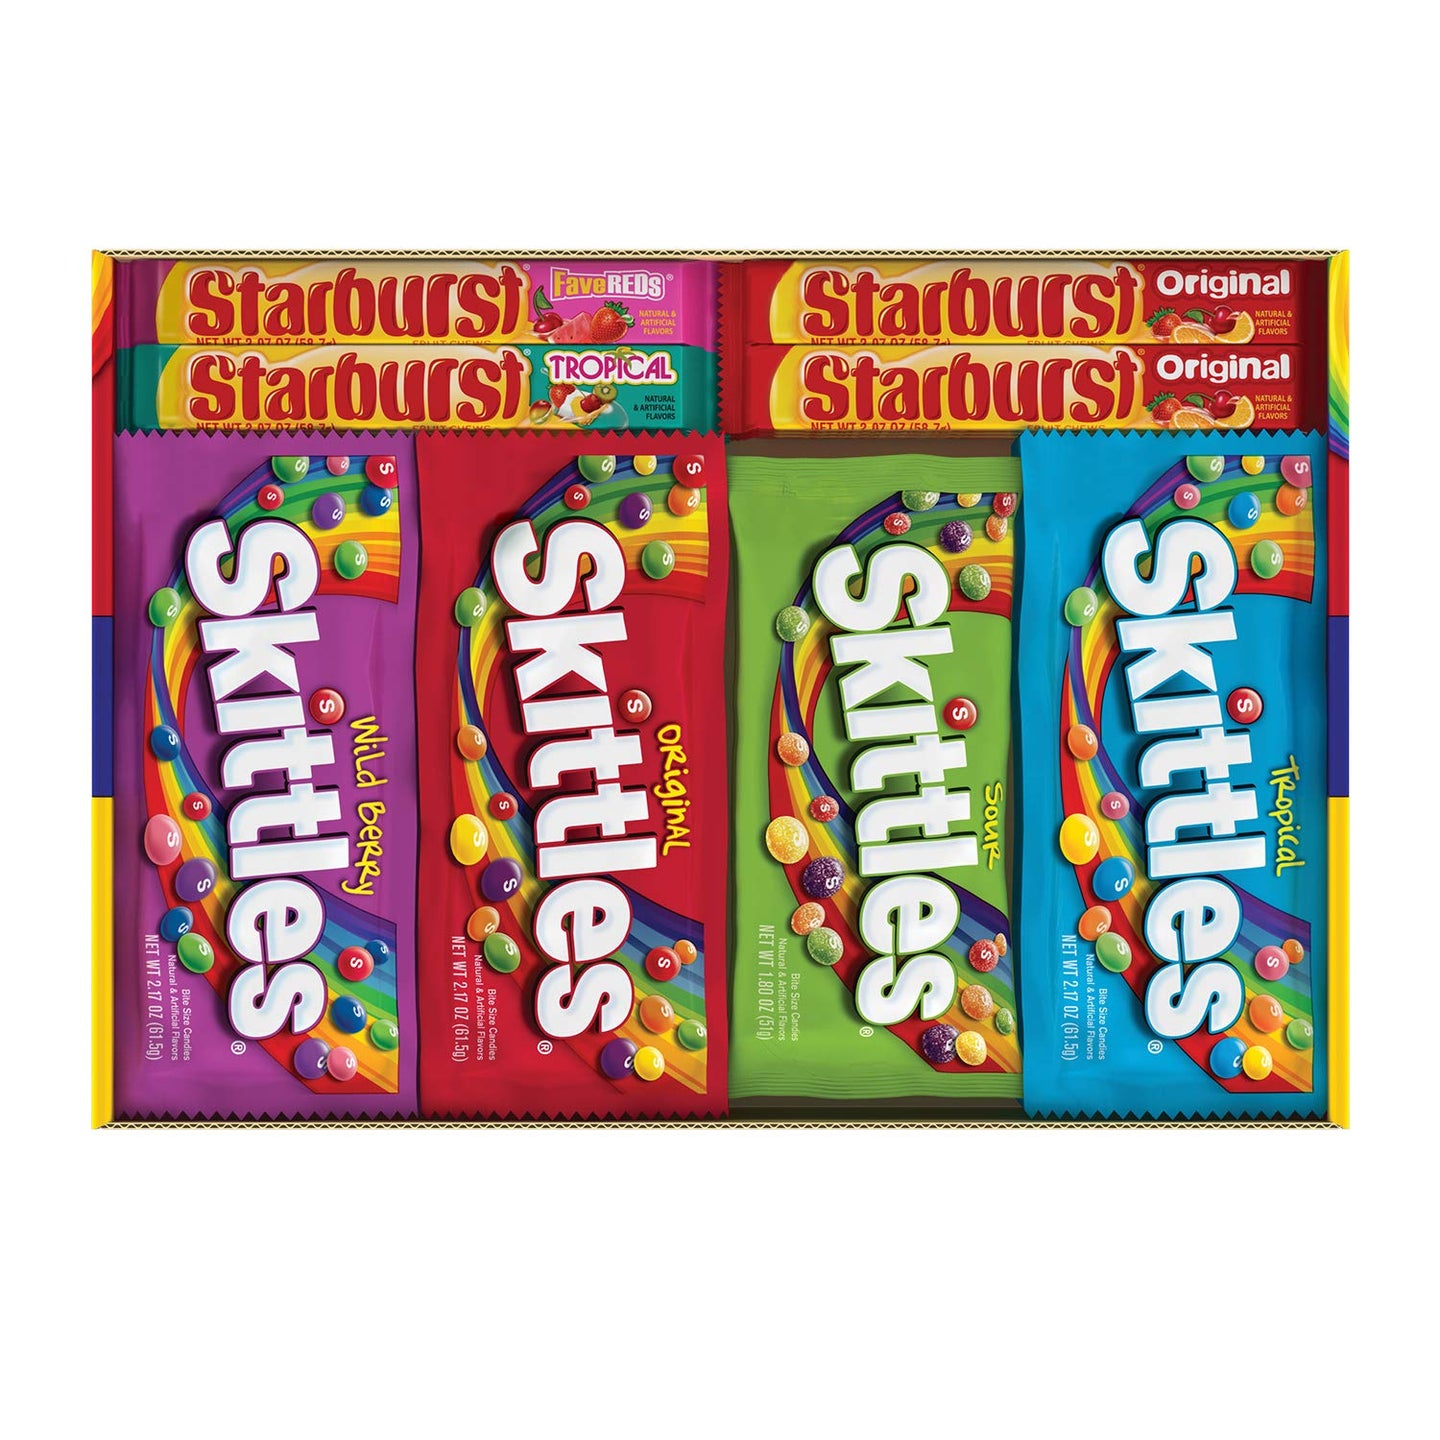 Skittles and Starburst Variety Pack 30ct./$1.23 each (Great Value Buy)